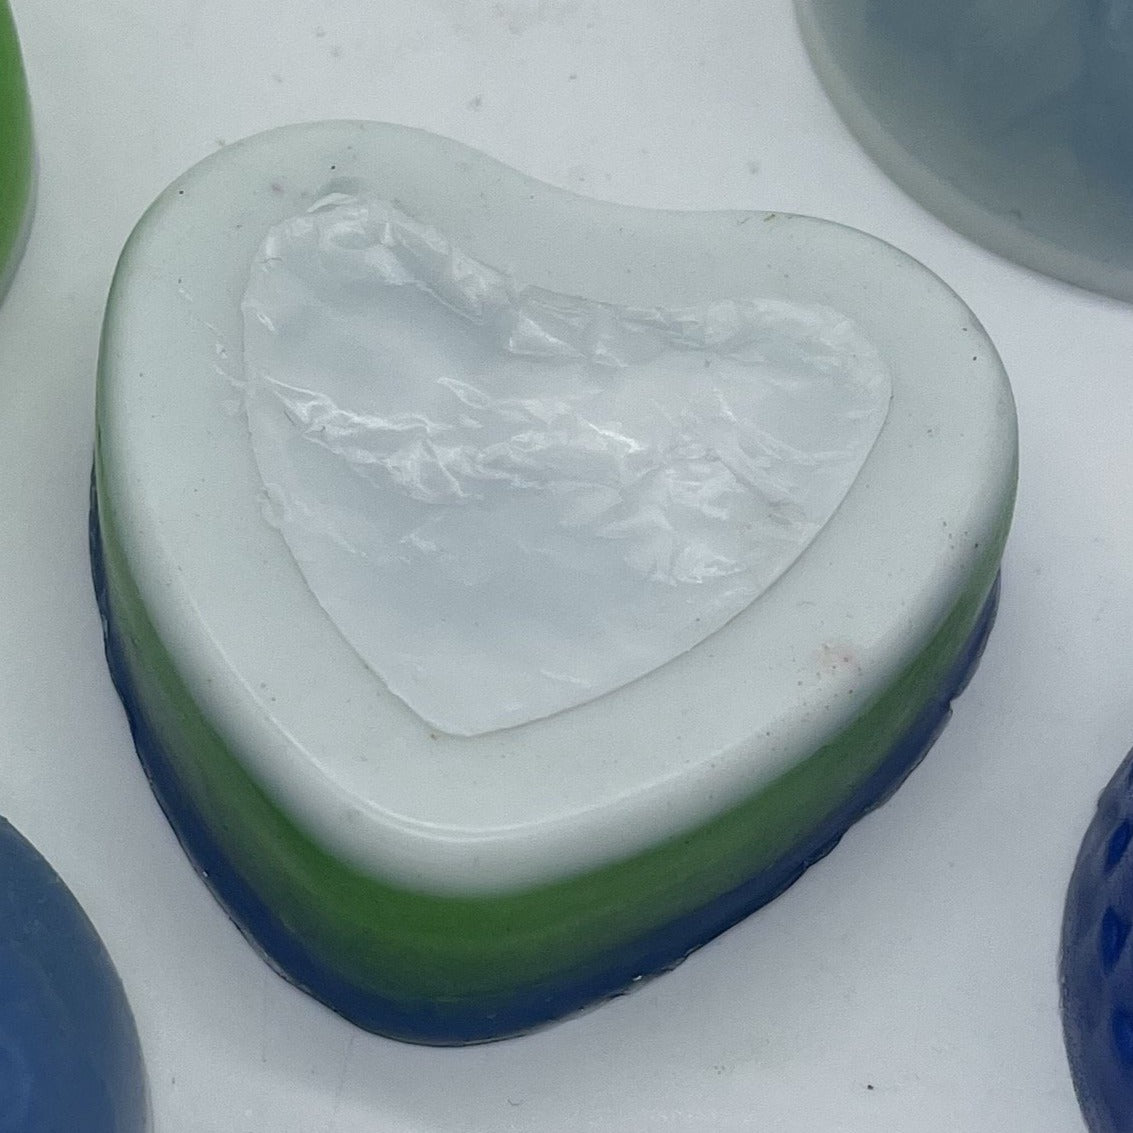 Heart shape soap layered in (from top) white, green and blue.